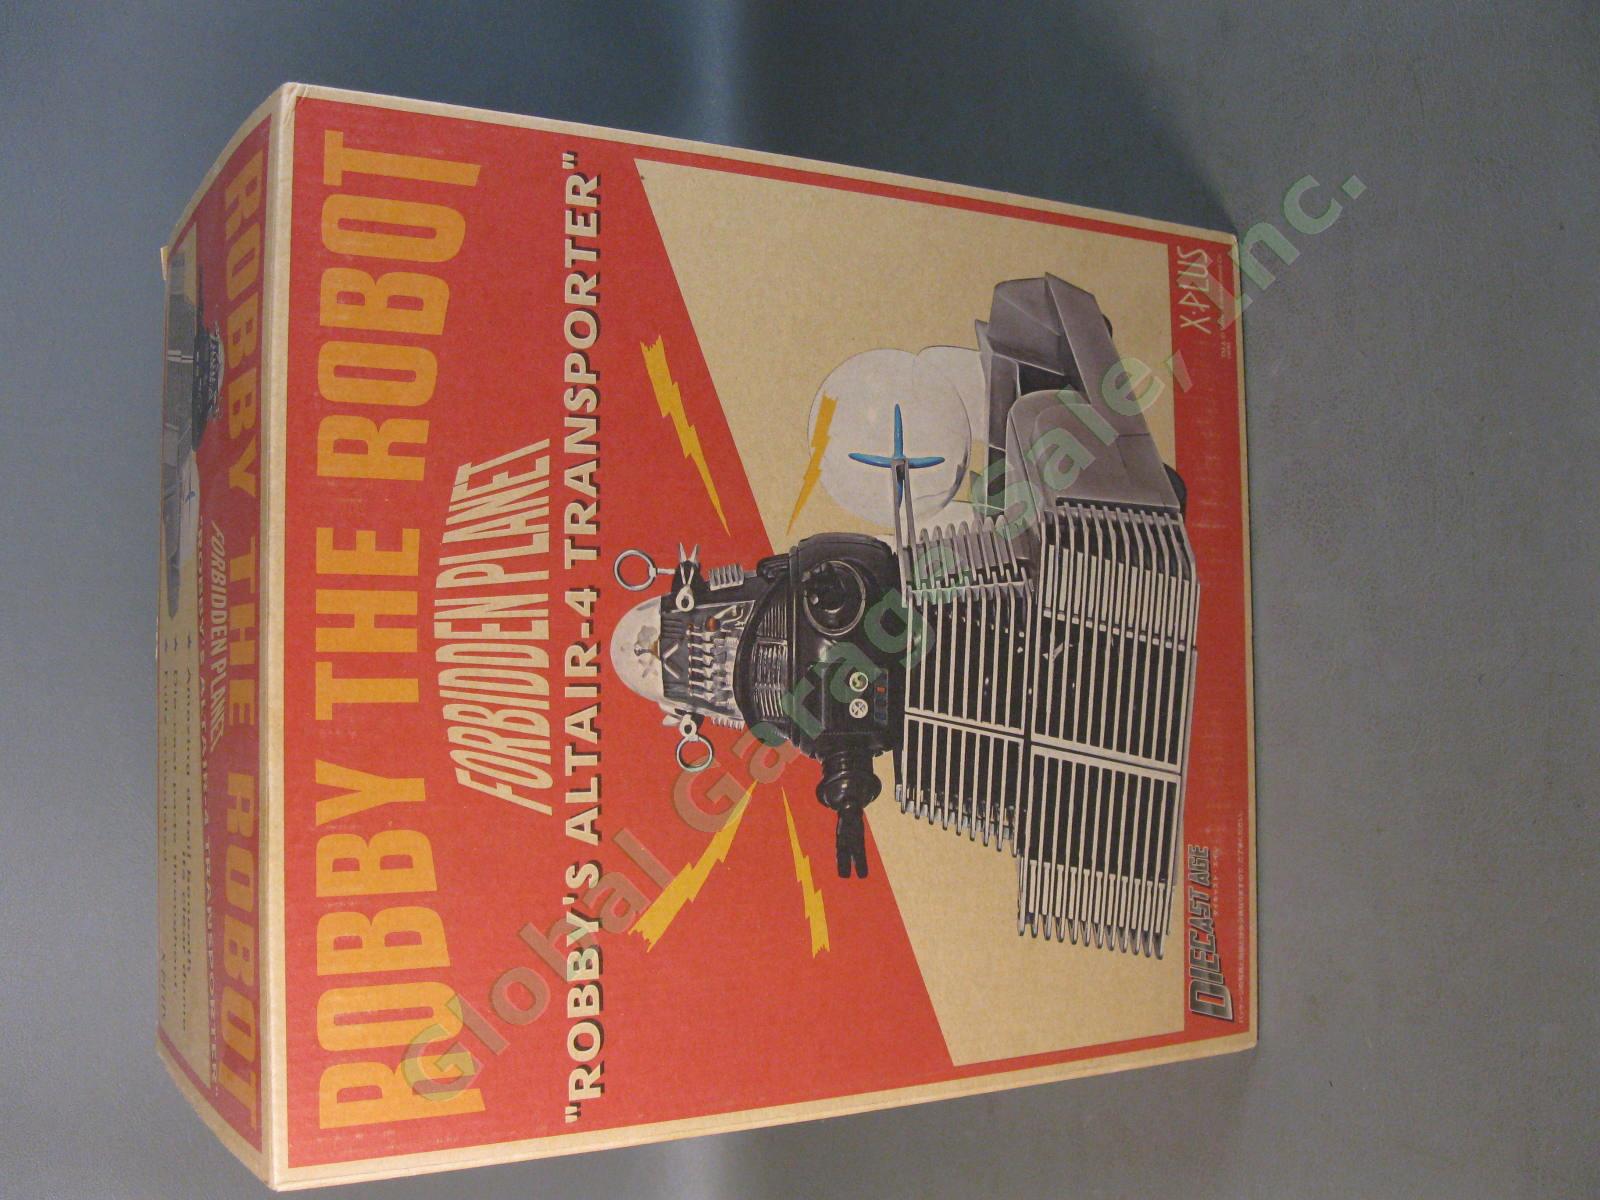 1956 Forbidden Planet Robby the Robot & Altair-4 Transporter 2006 X-Plus Sci-Fi